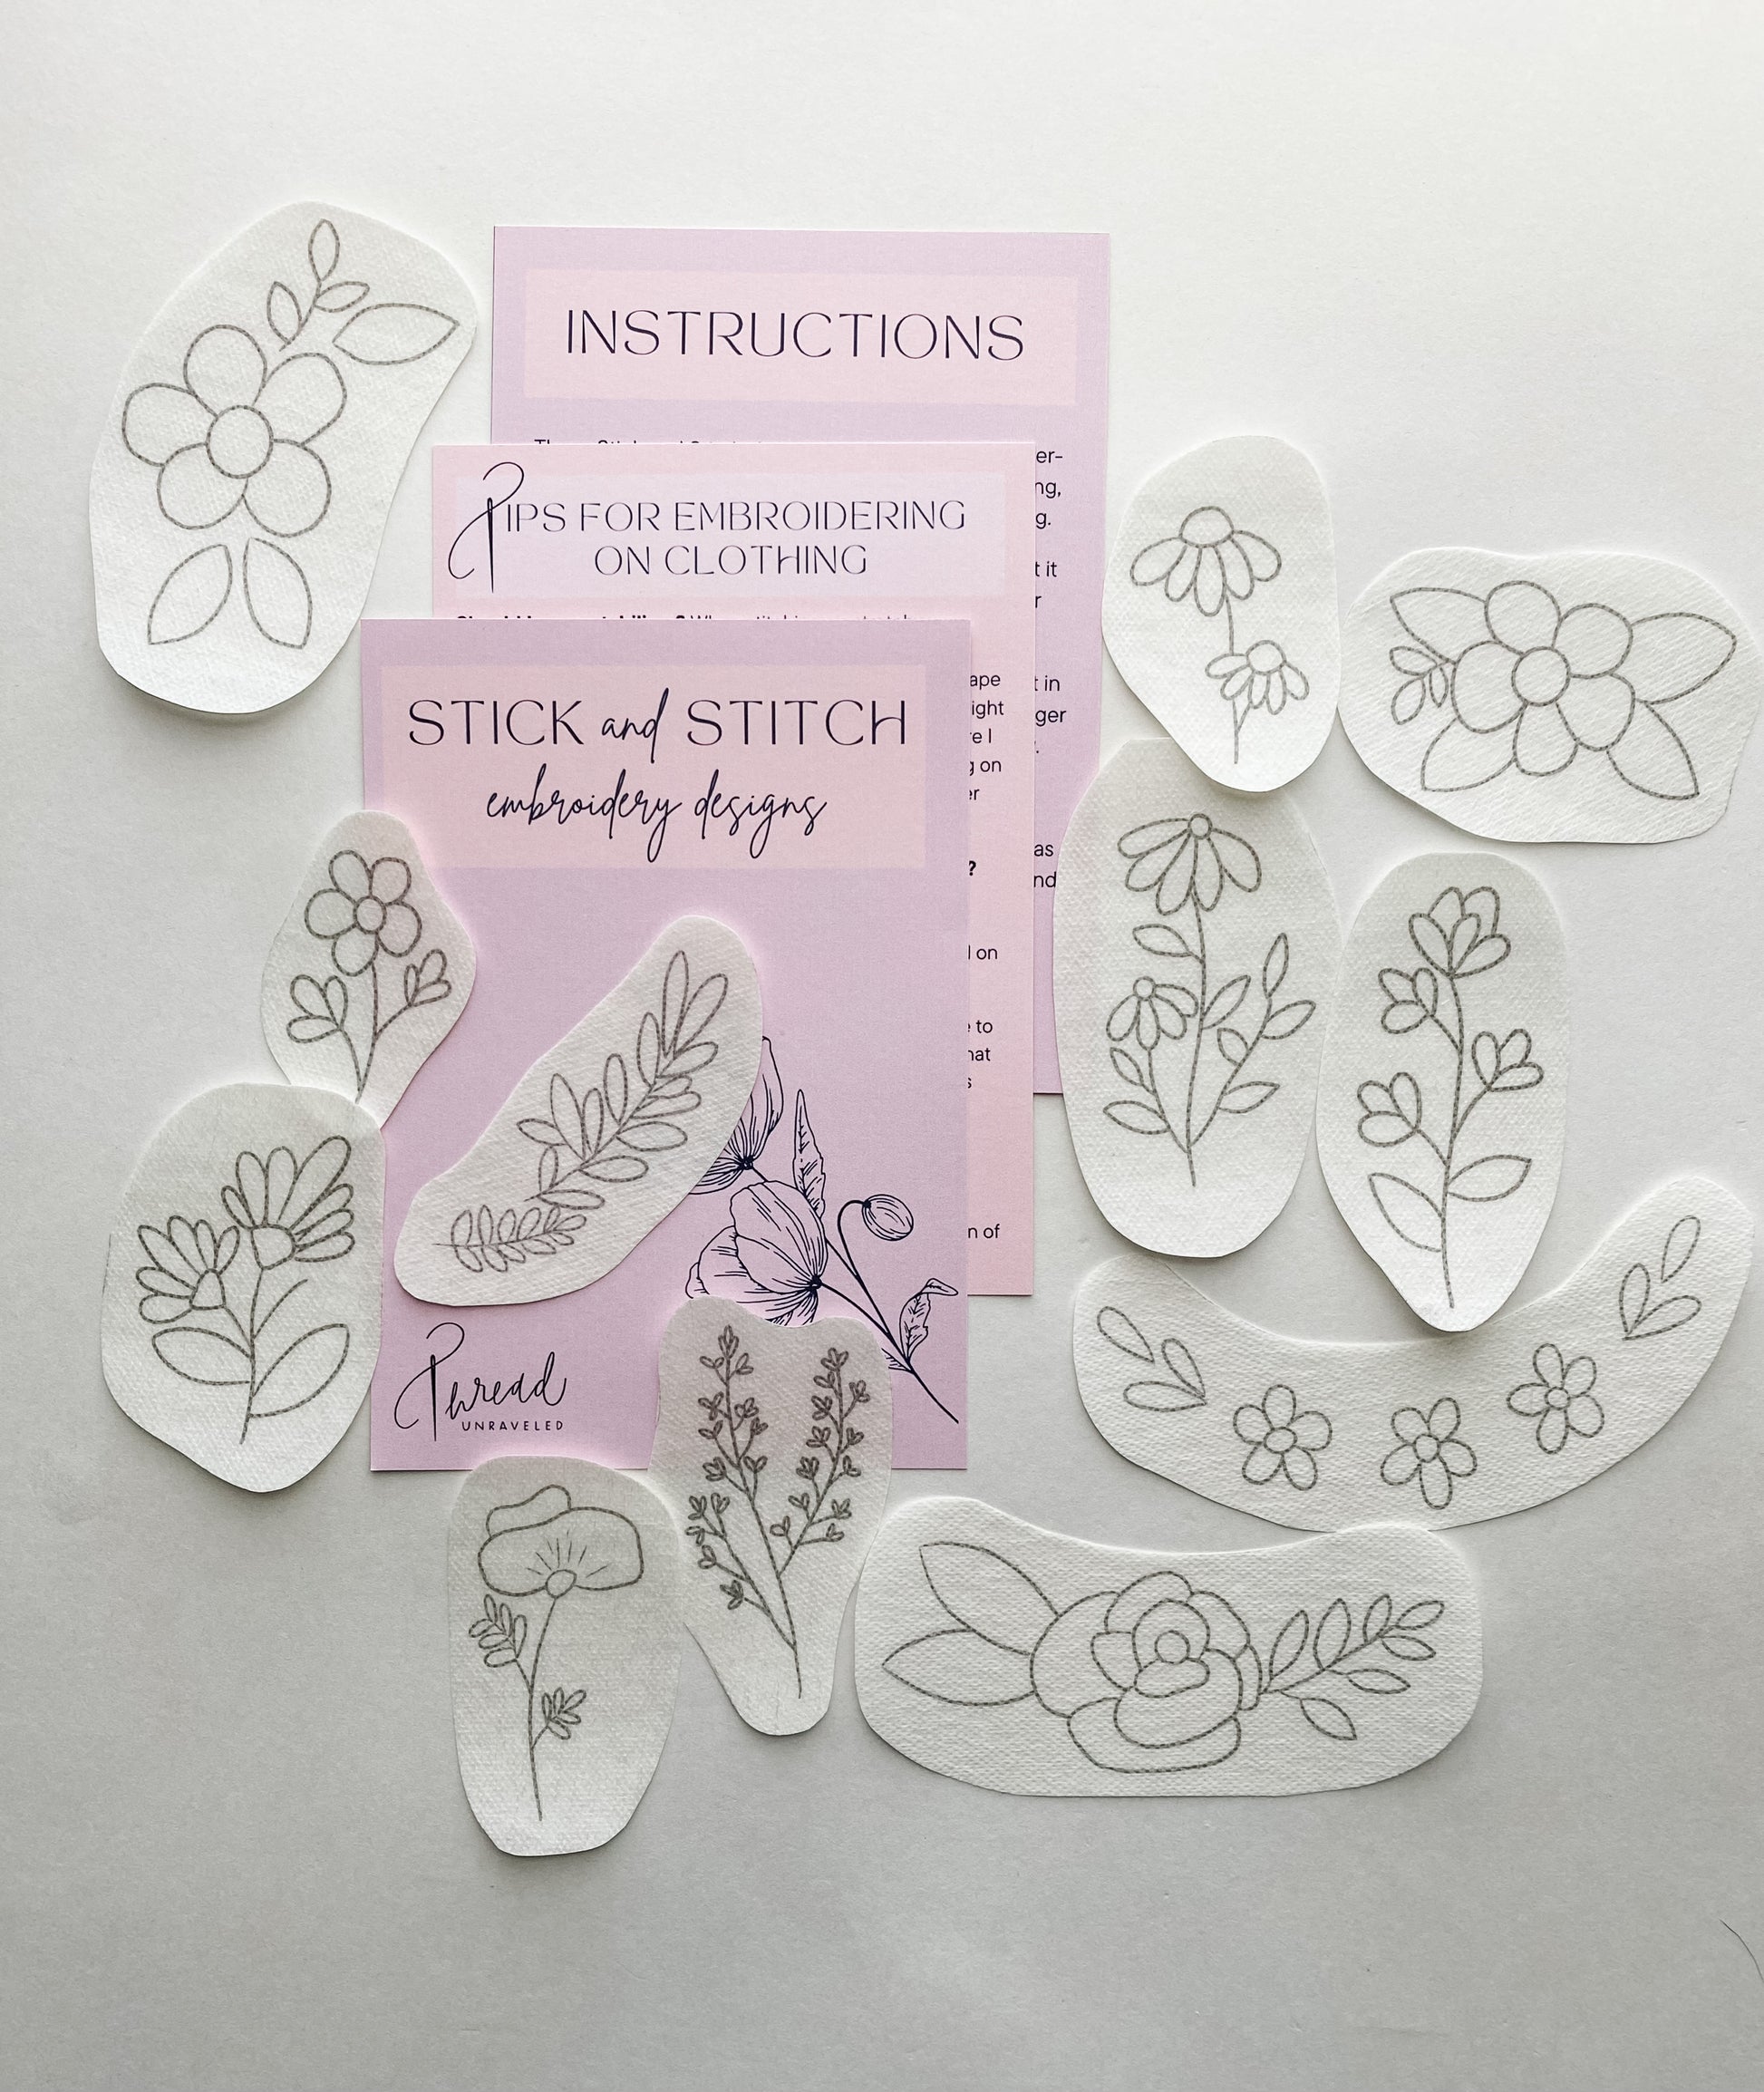 Stick and Stitch Embroidery Patterns / Backyard Birds / Water Soluble  Designs / Instructions Included 